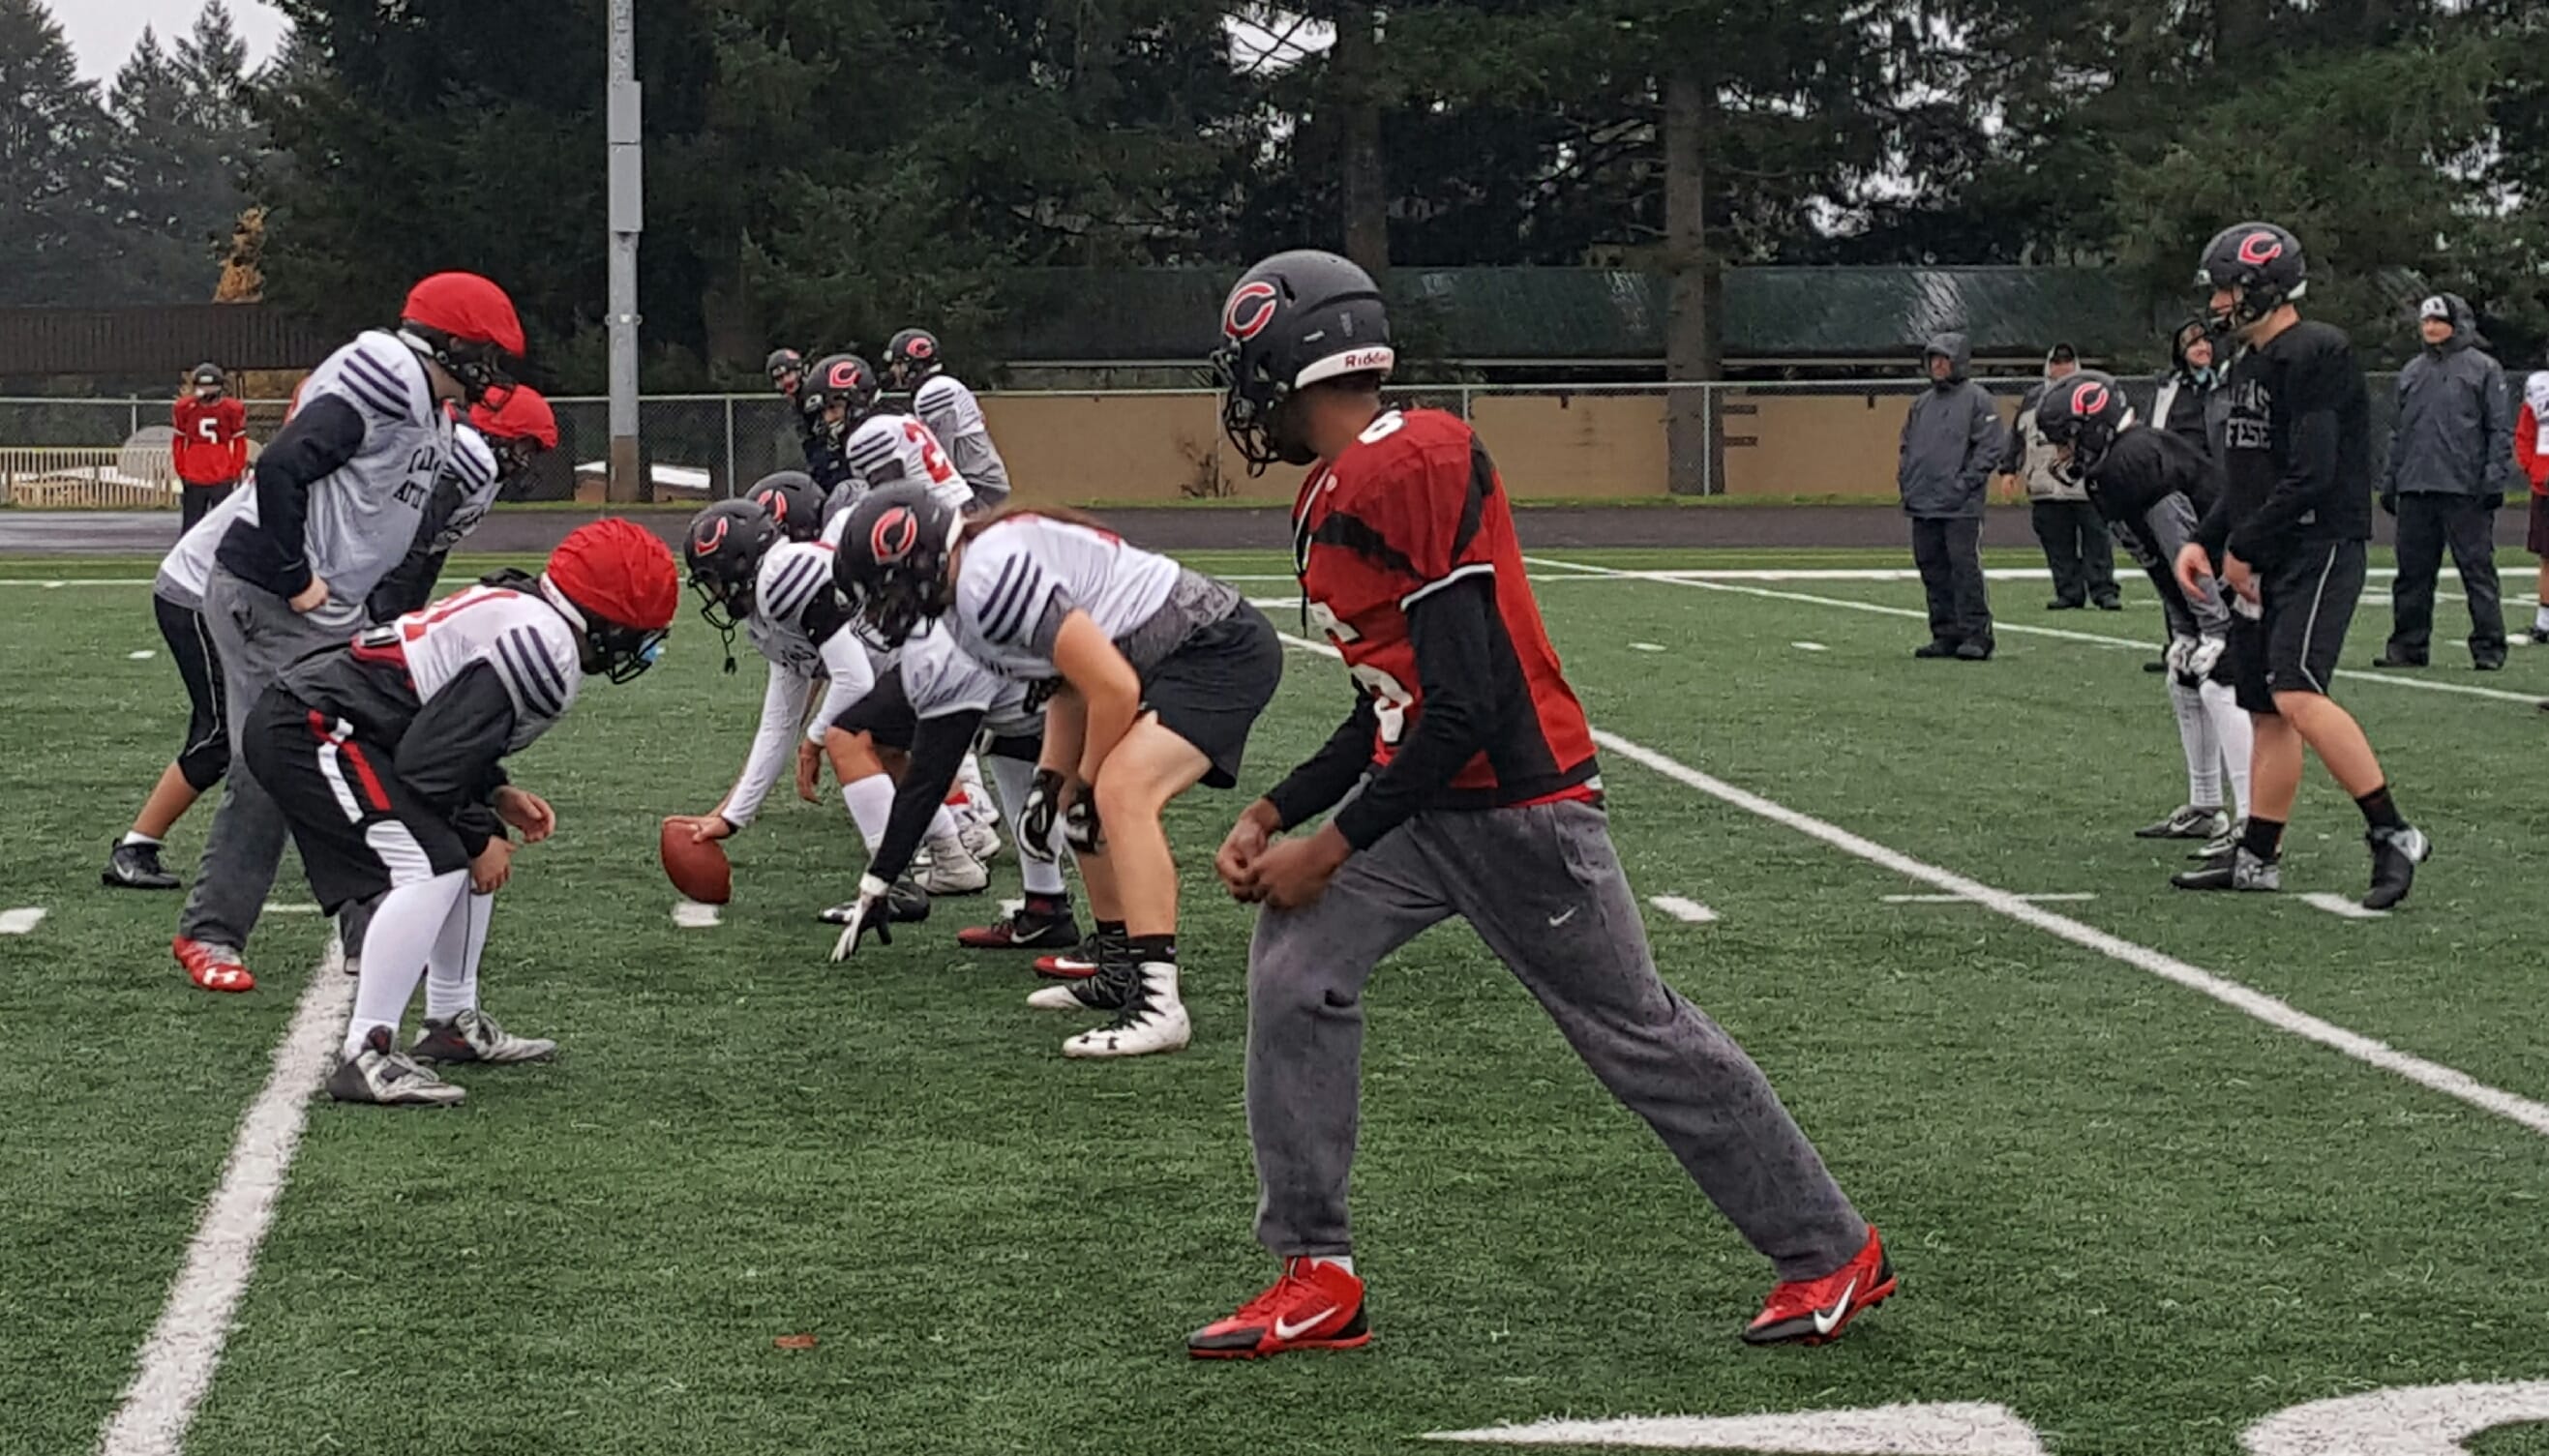 The Camas football team practices on Thursday ahead of its Class 4A state semifinal game against Sumner on Saturday.